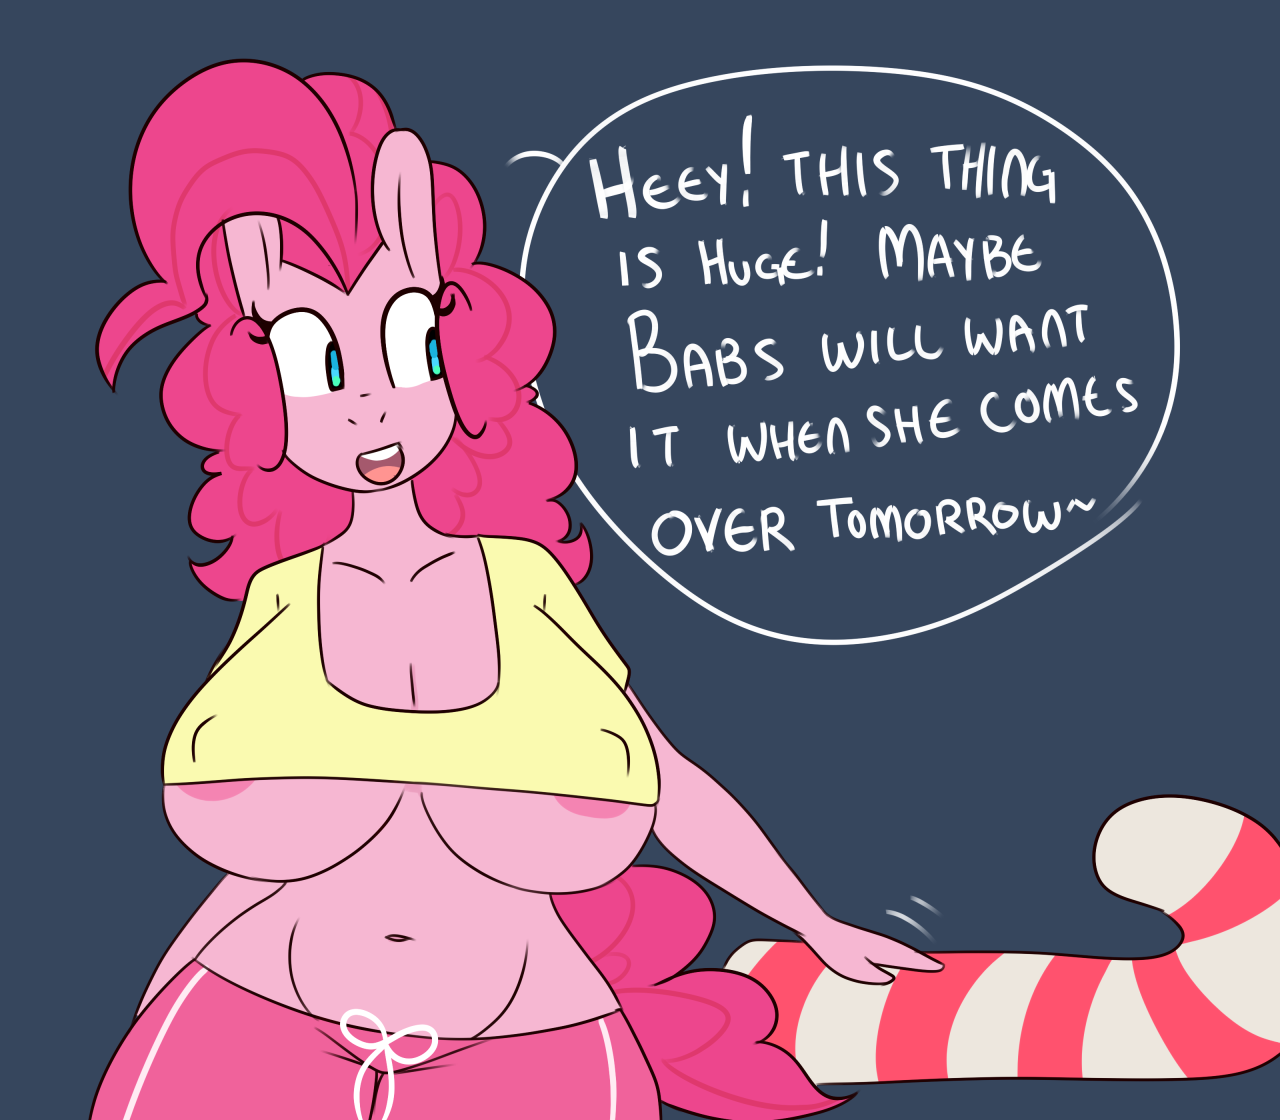 somescrub:  She must be used to big things since she lives in Big ol’ Manehattan.